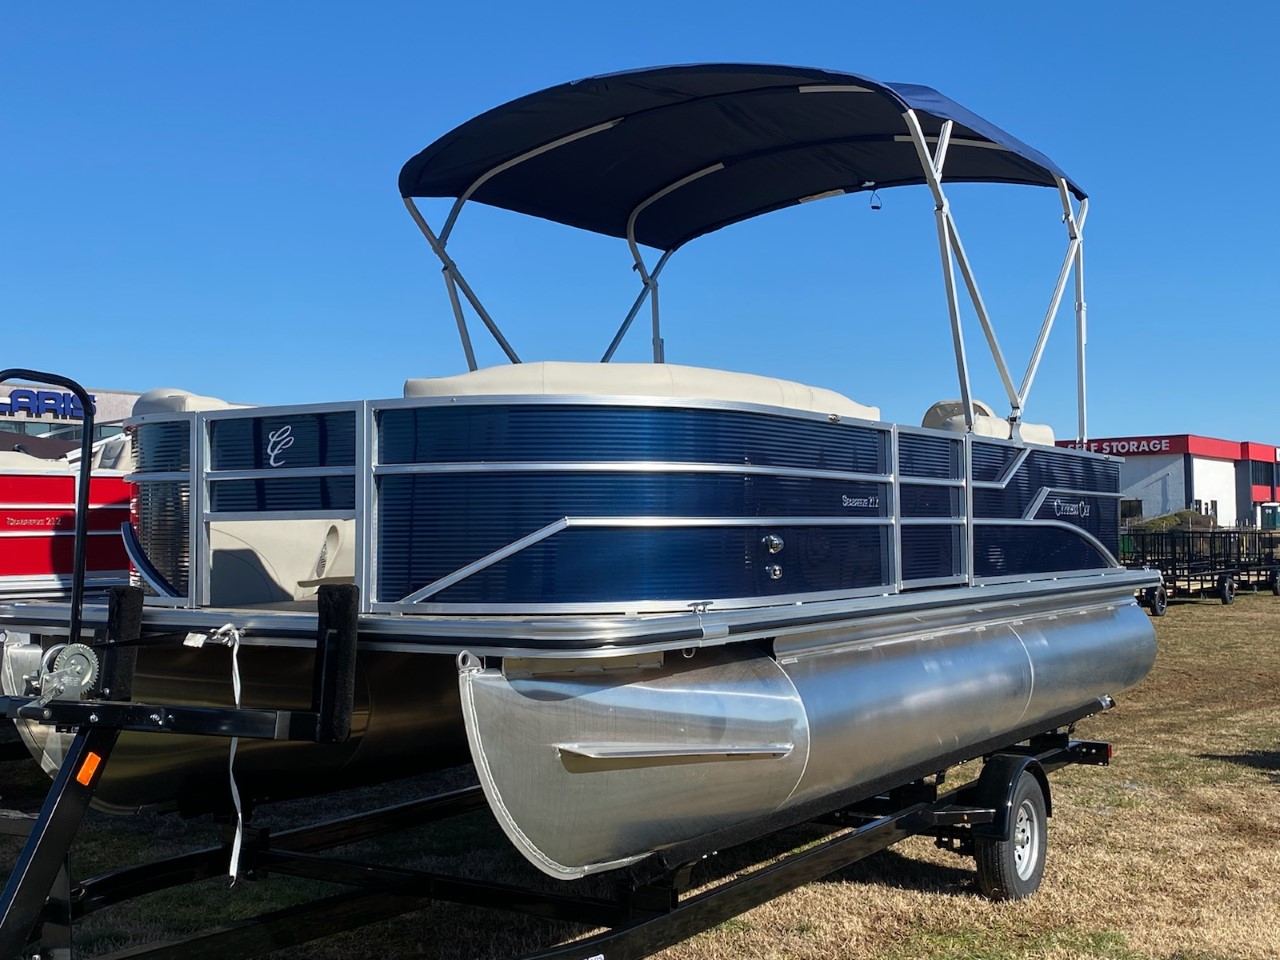 2022 CYPRESS CAY SEABREEZE 212 Pontoon Boat for sale in College Dale, TN - image 2 